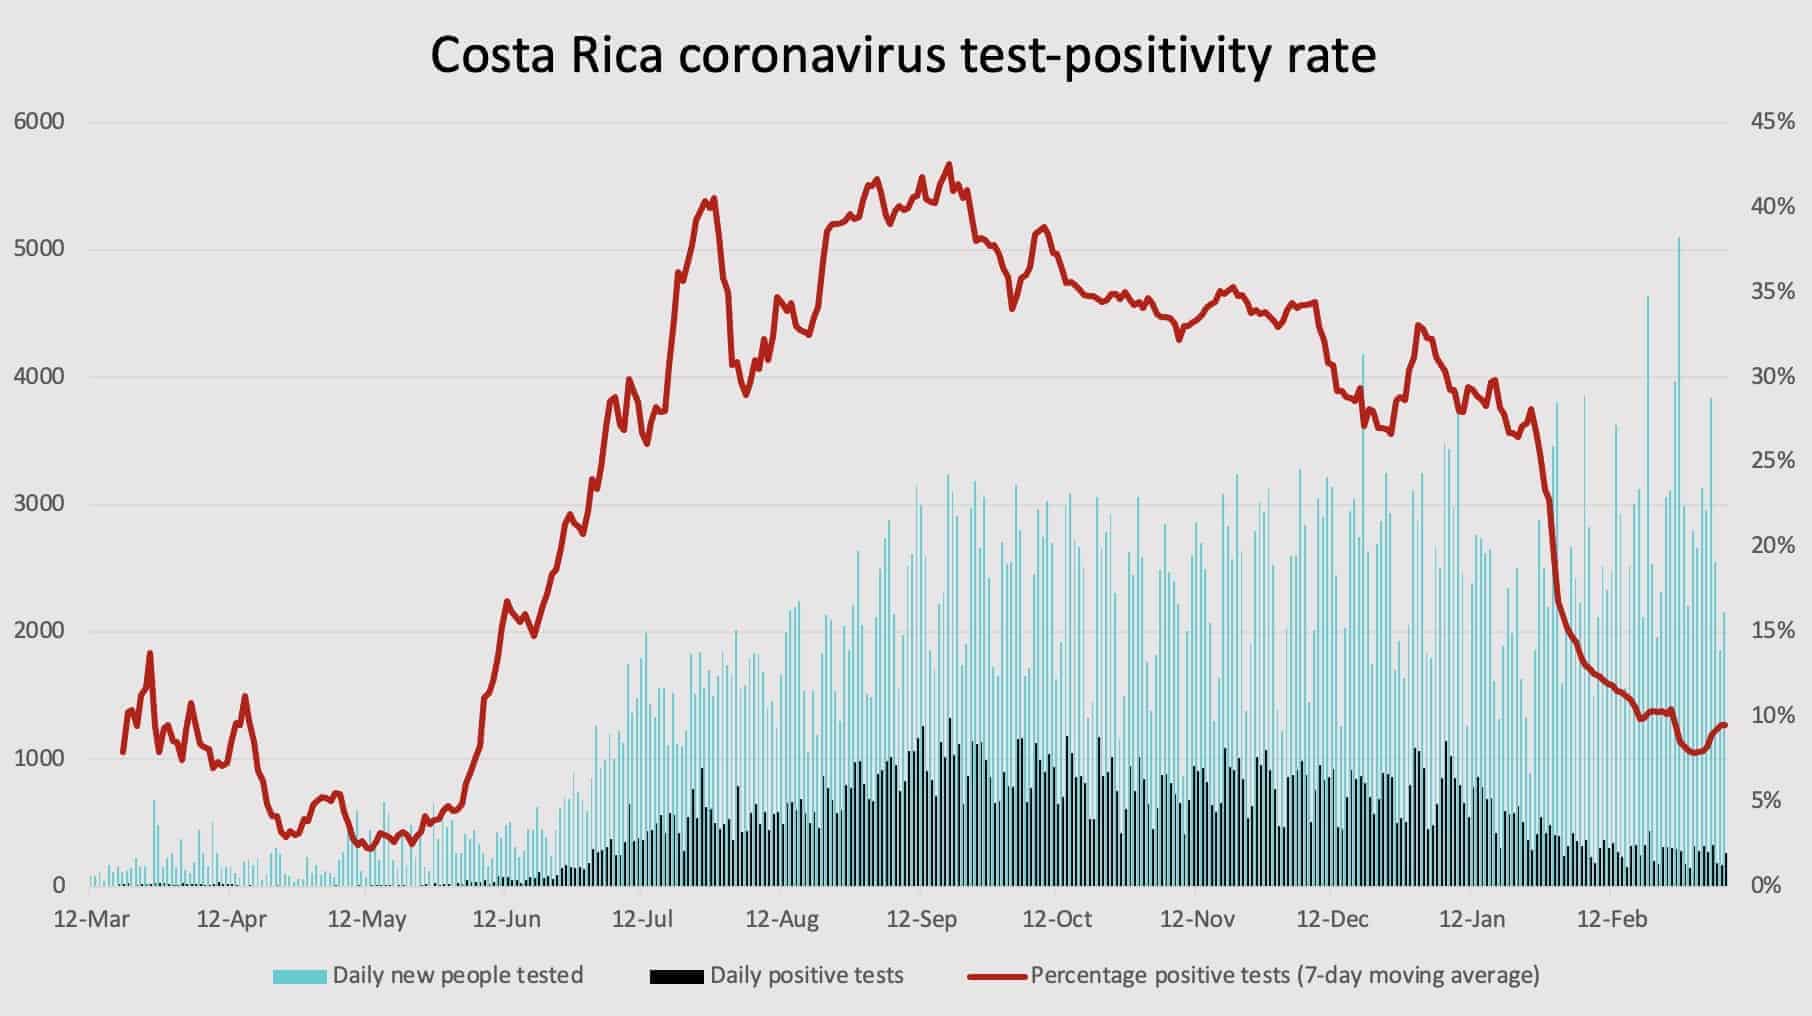 Costa Rica's test-positivity rate as of March 9, 2021.